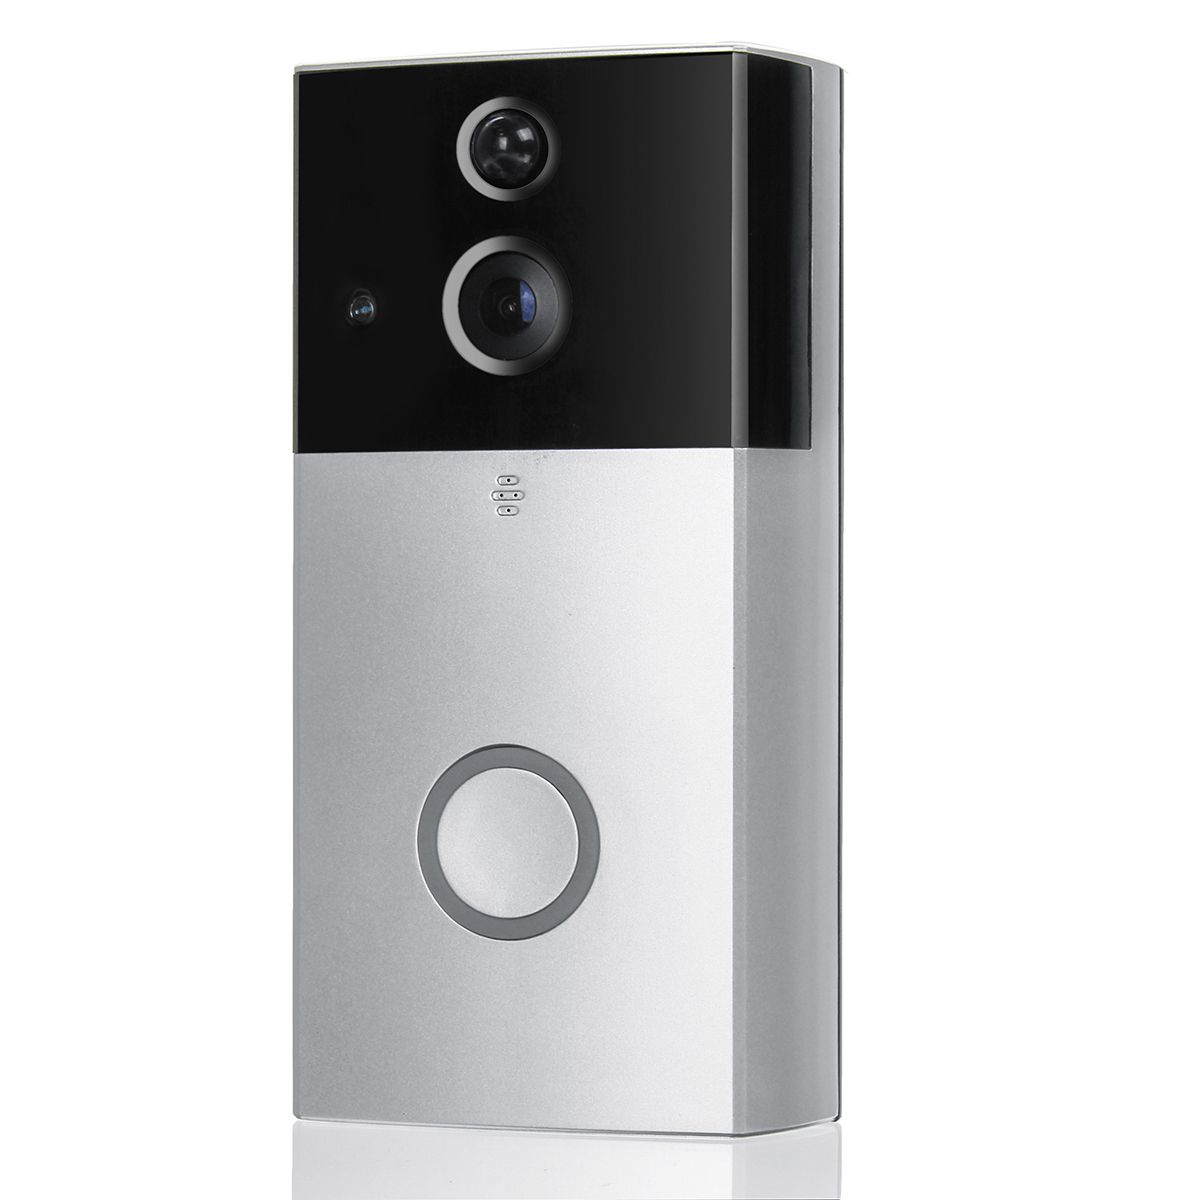 Smart-Wireless-WiFi-Video-Visible-Doorbell-Battery-Motion-Detection-Recorder-APP-1288281